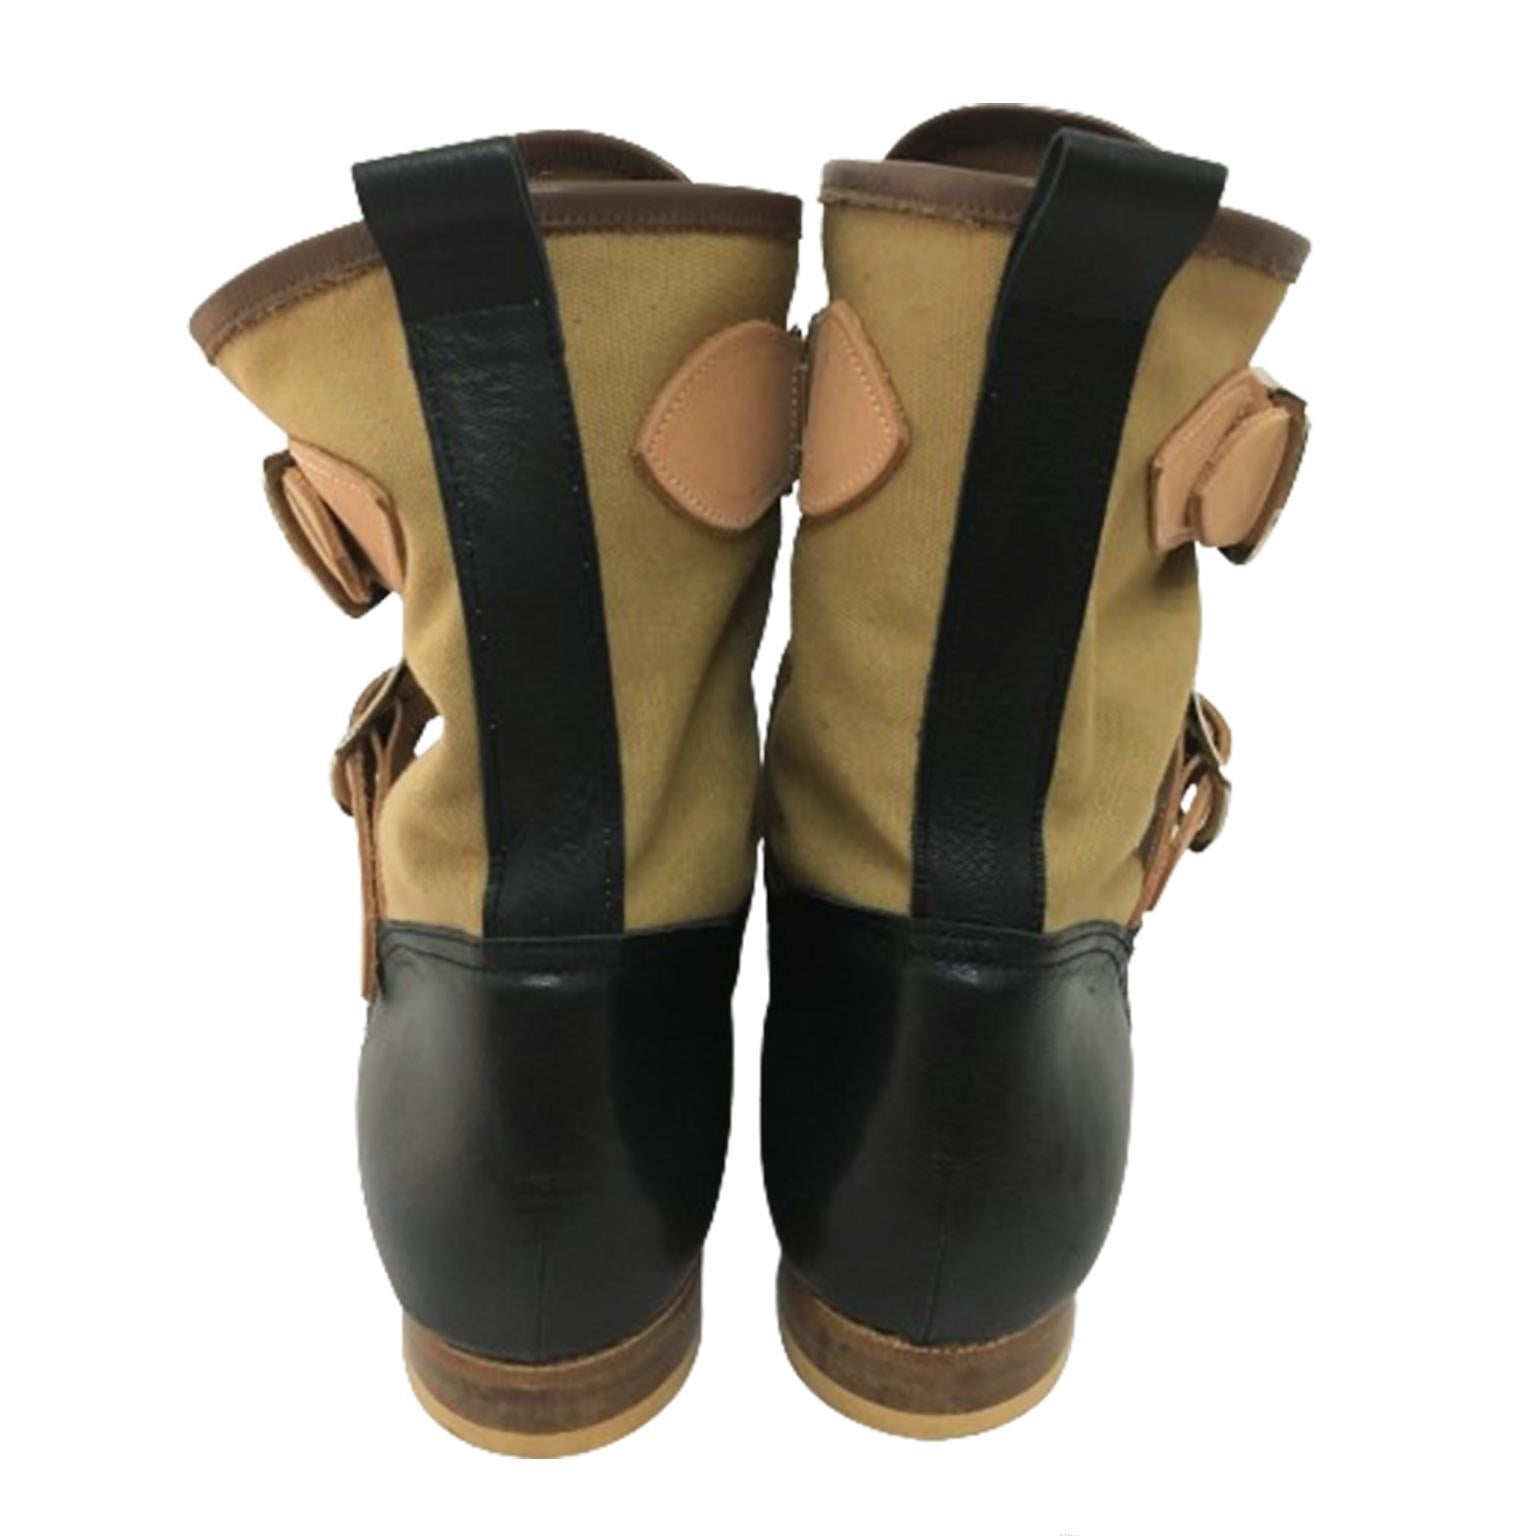 First seen in Westwood Mclaren 1976 'Seditionaries' collection, the Seditionaries boots are made in England from khaki canvas, black leather and feature buckle fastenings in raw tan leather. 
Concealed lace-up fastening (Comes with extra shoelace in